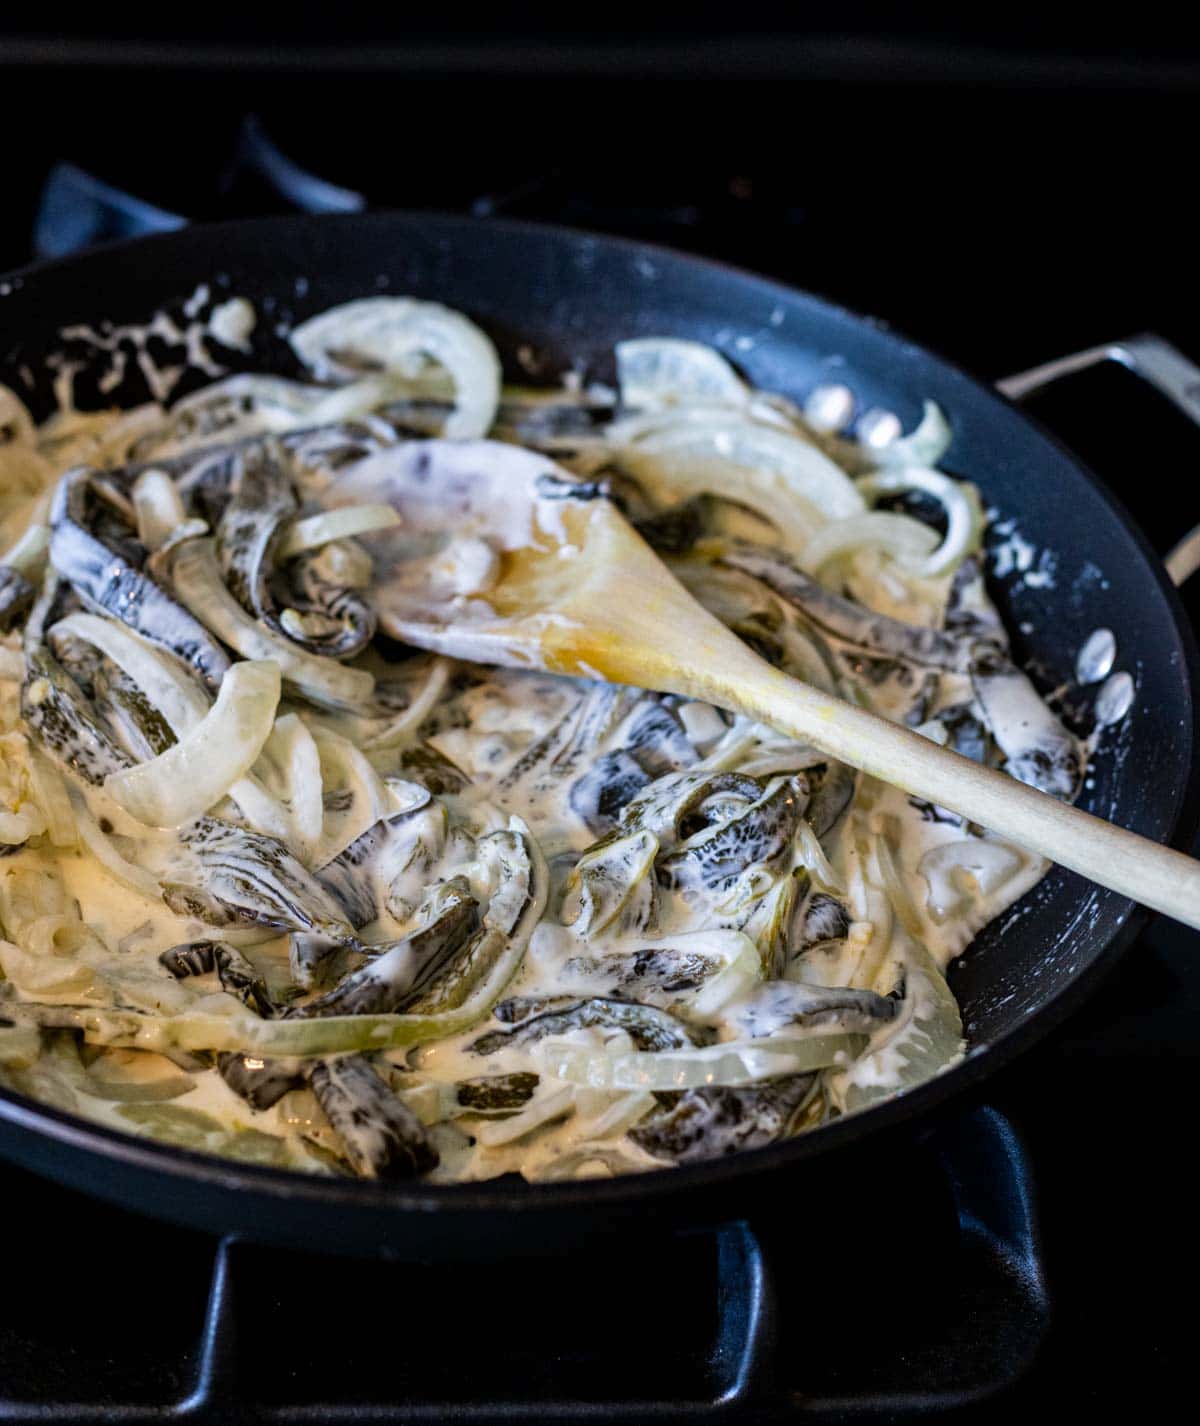 Roasted poblano peppers and onions in cream sauce cooking in a skillet.